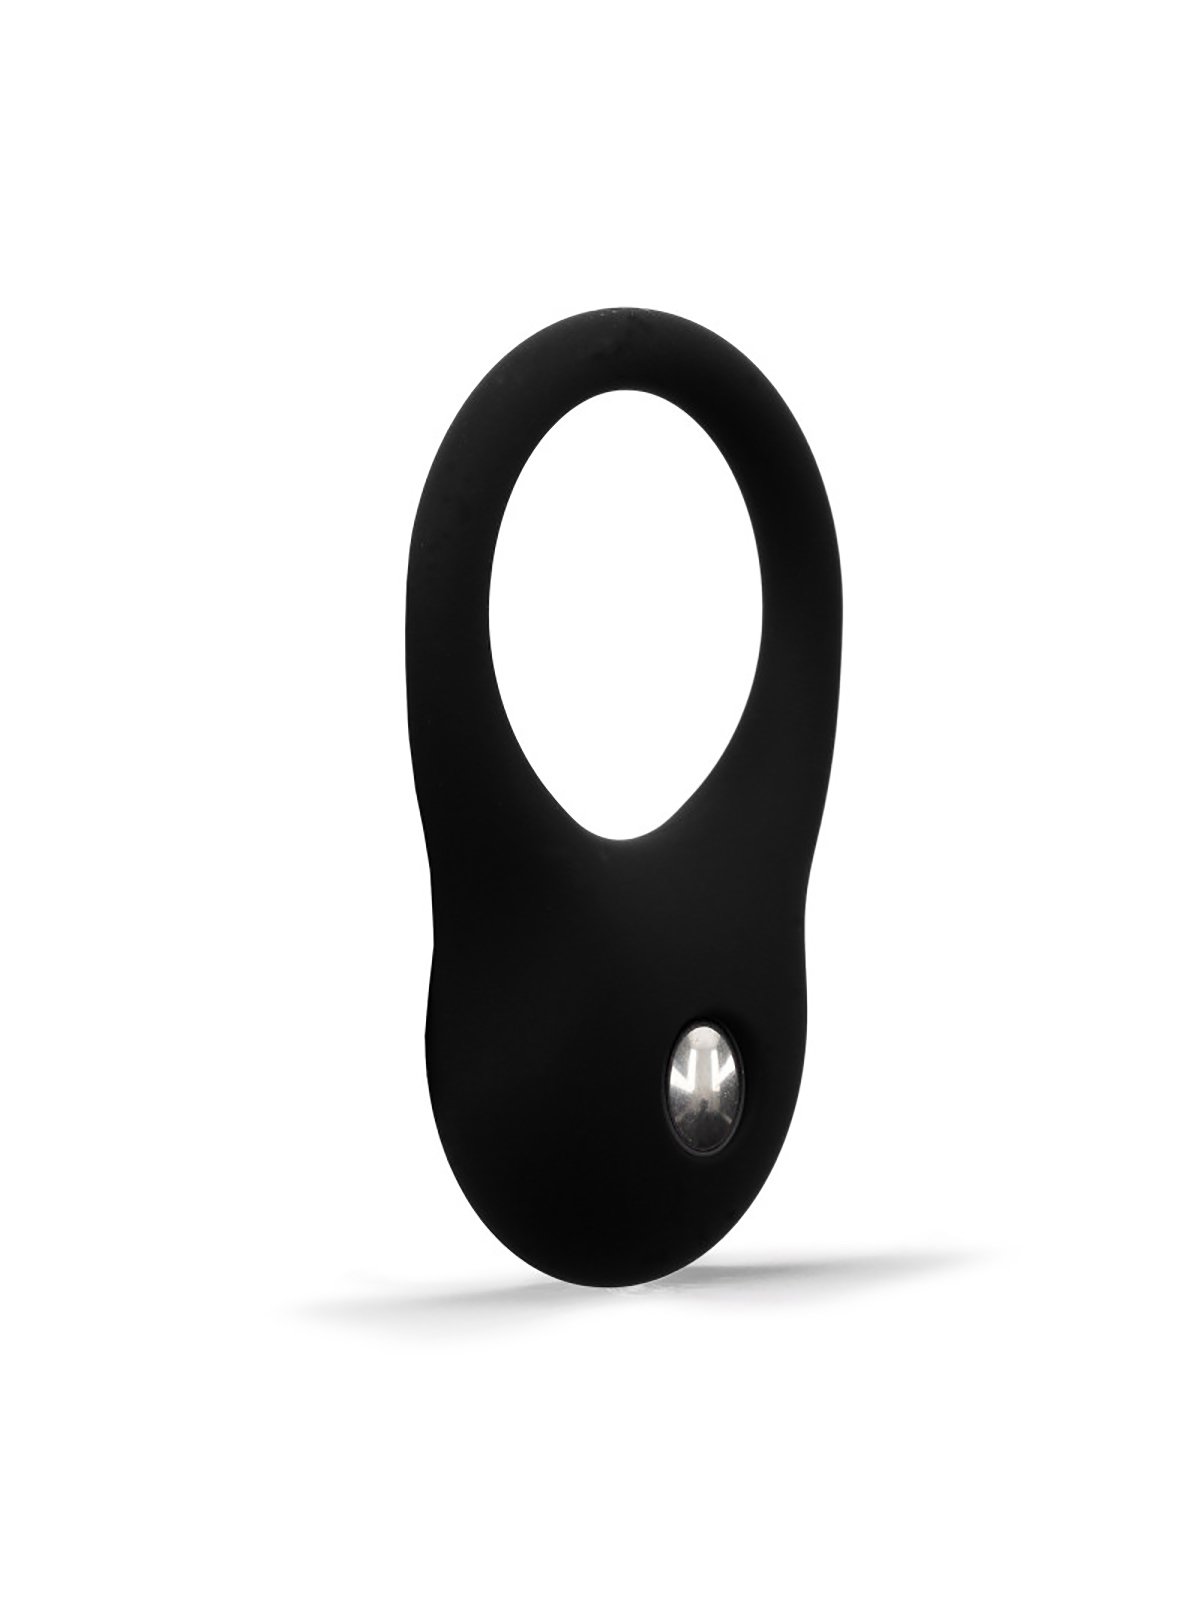 Weighted Cockring Silicone | Light Weighted